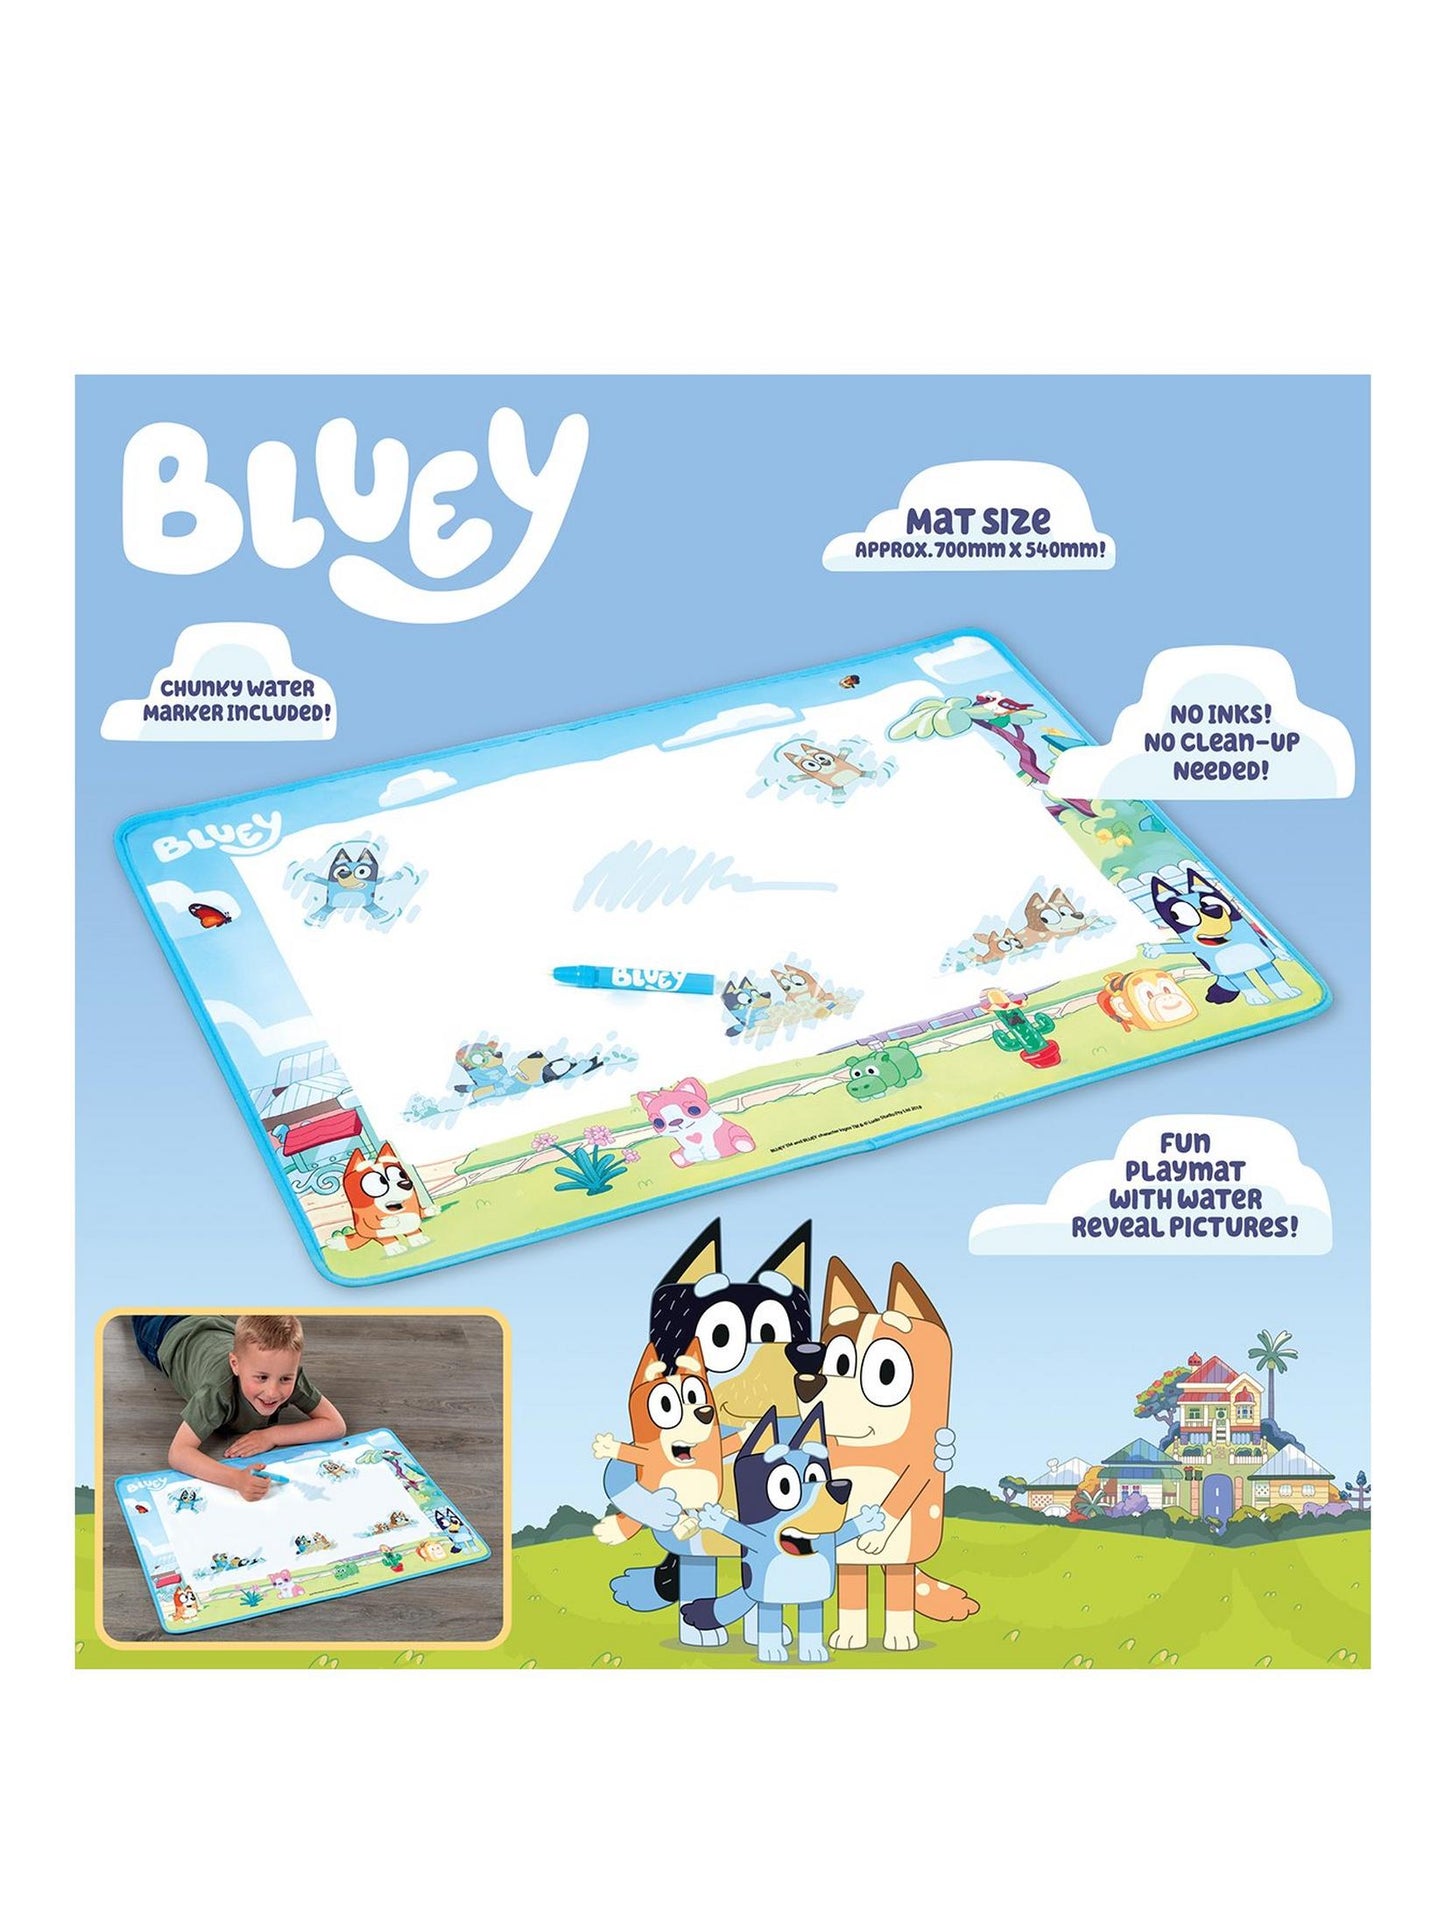 Bluey the dog, Bluey toys, Bluey, Bluey and Bingo, Bingo the Dog, Bluey Toys, Bluey Merchandise, Bluey House, Bluey Season 2, Bluey Season 3, Bluey Season 4, Bluey Cast, Bandit Healer, Bluey Youtube, Dougie, Muffin Cupcake Heeler, Stripe, Trixie, Rad, and Brandy, Bluey House, Bluey Character, Bluey Figures, Bluey Guests, Bluey Party, Bluey Friends,  Bluey and Friends: Bluey, Coco, Snickers and Honey 4 Figure Pack & Bluey and Bingo Grannies Playset: Articulated 2.5 Inch Action Figures 2-Pack, Bluey and Famil